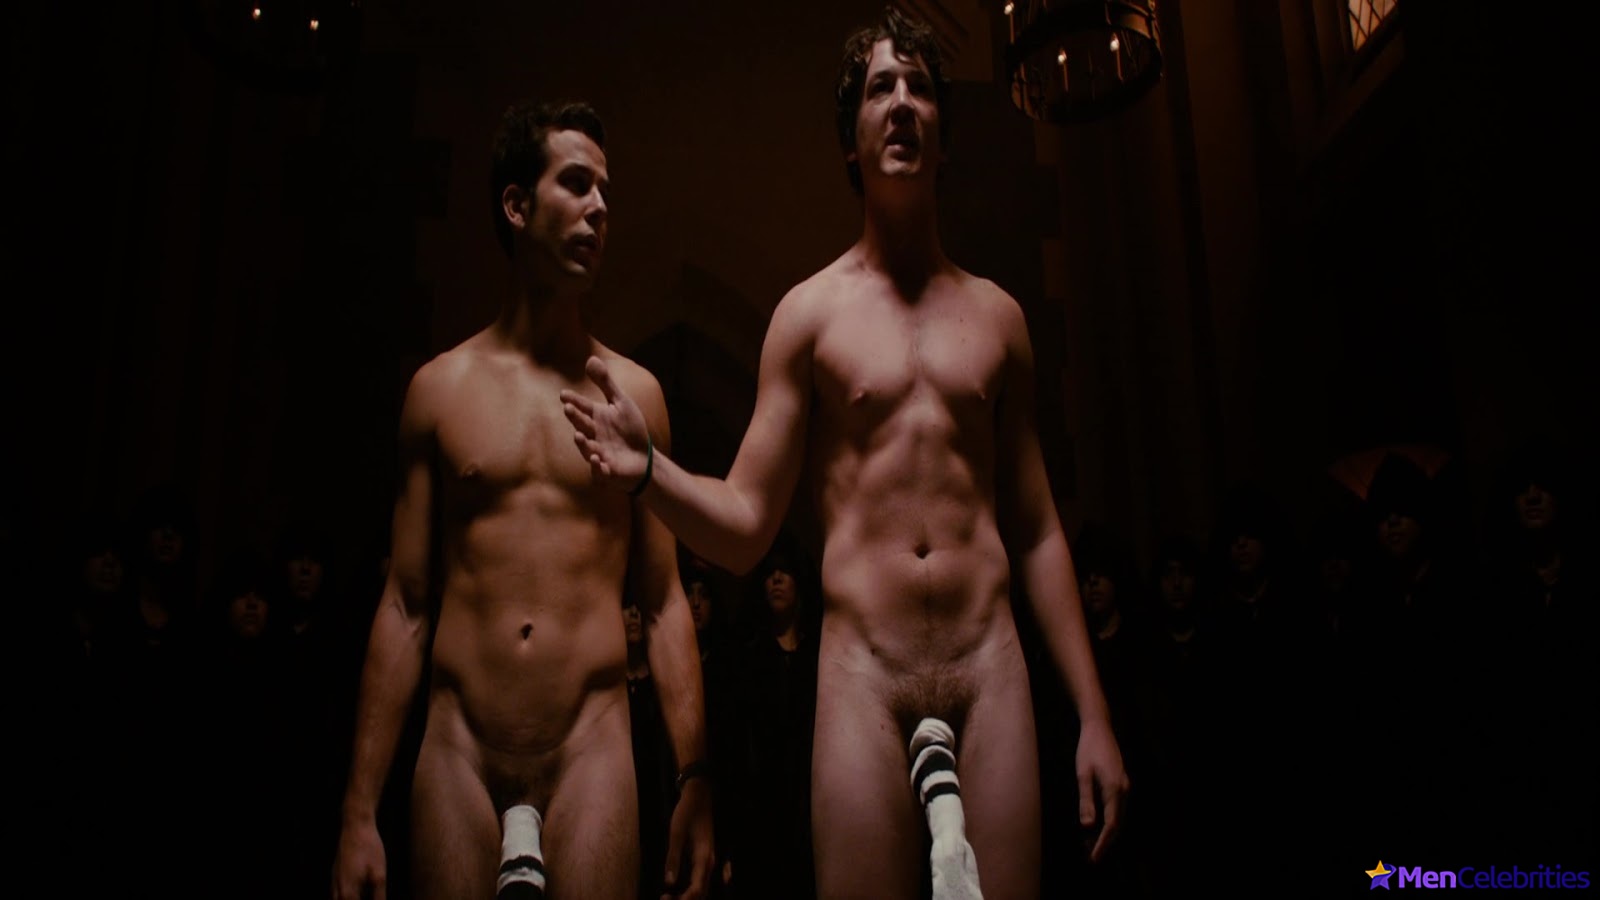 And now it’s time to move on to the most juicy - Miles Teller nude and naug...